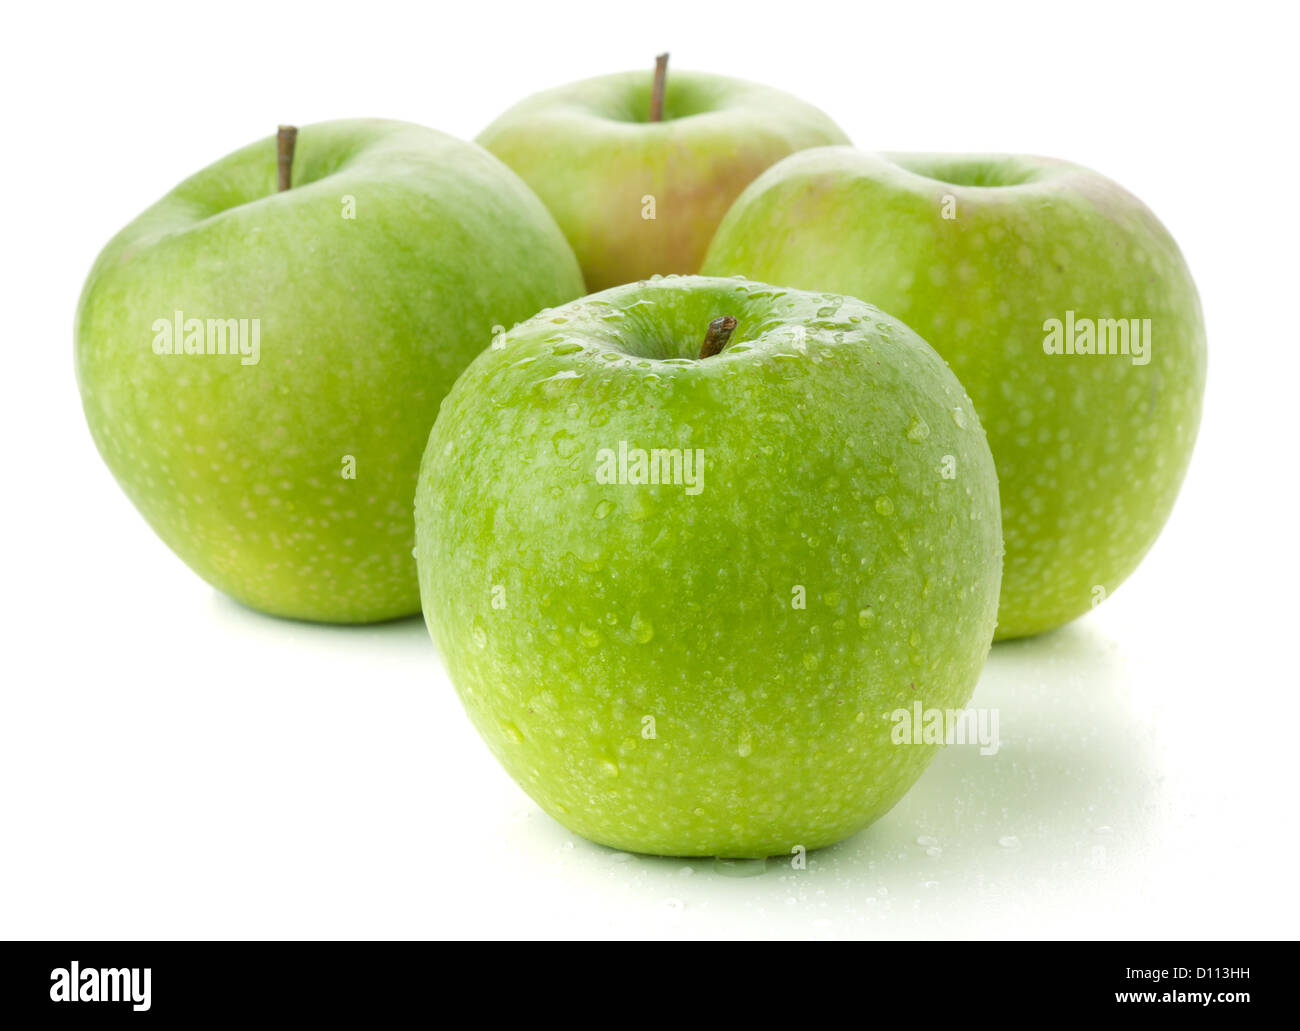 Four ripe green apples. Isolated on white Stock Photo